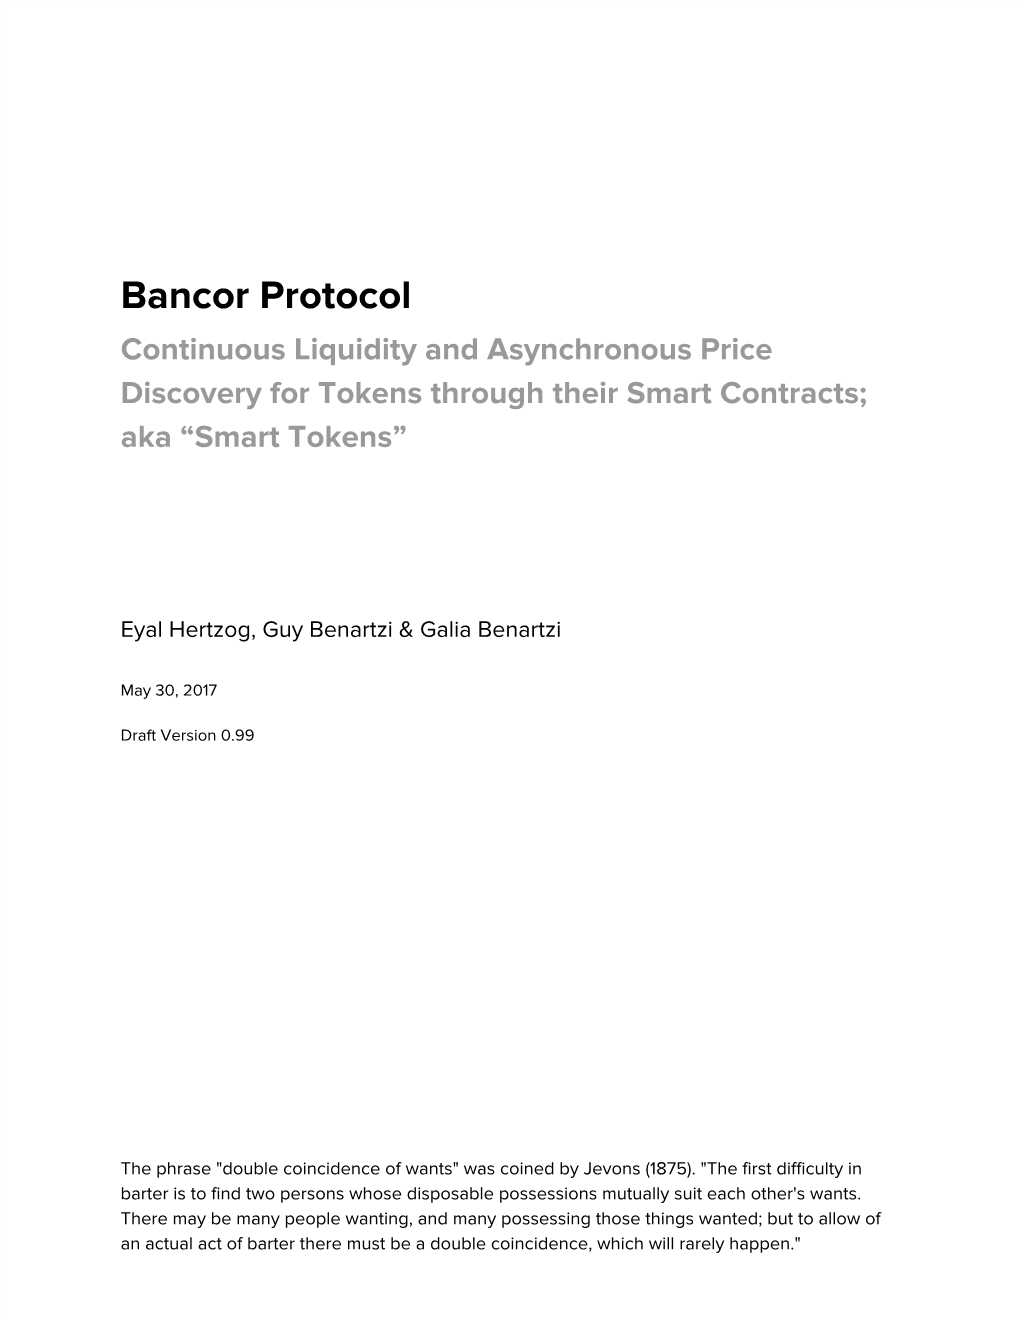 Bancor Protocol Continuous Liquidity and Asynchronous Price Discovery for Tokens Through Their Smart Contracts; Aka “Smart Tokens”